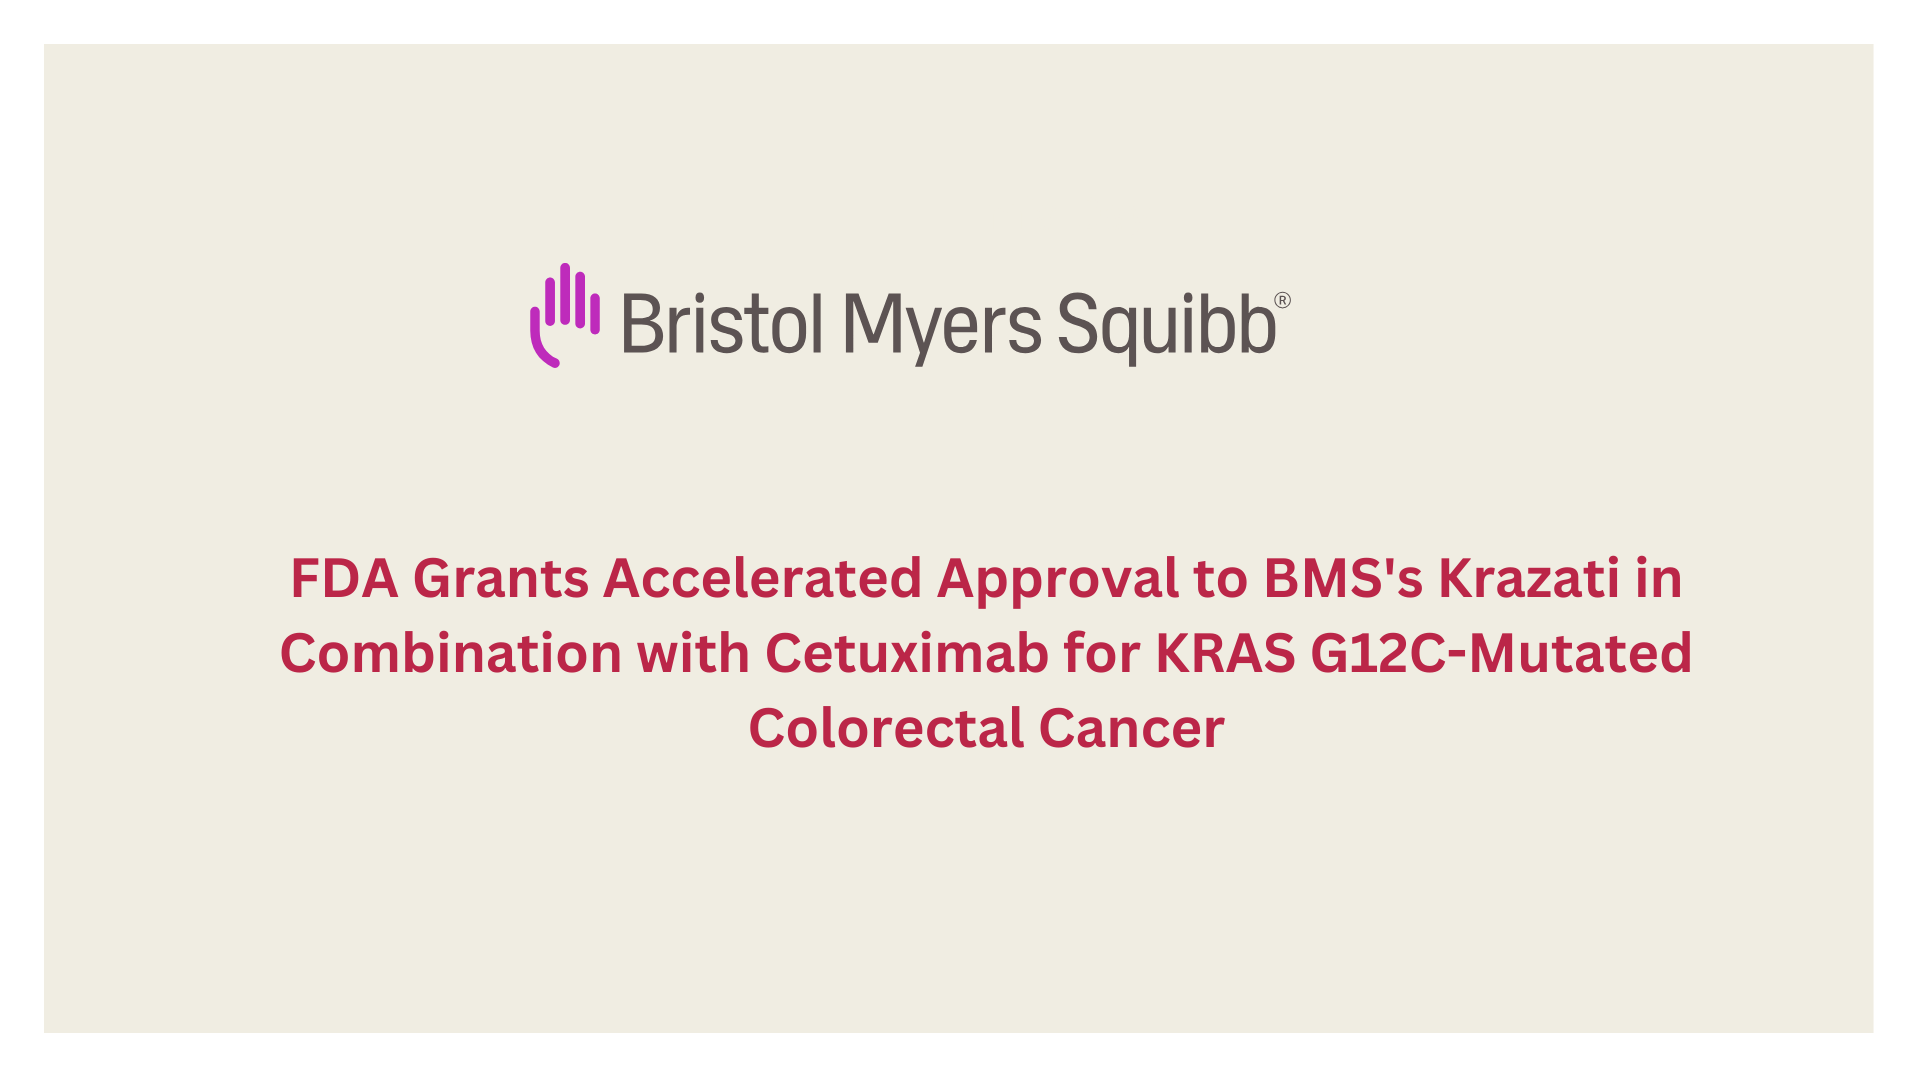 FDA Grants Accelerated Approval to BMS's Krazati in Combination with Cetuximab for KRAS G12C-Mutated Colorectal Cancer